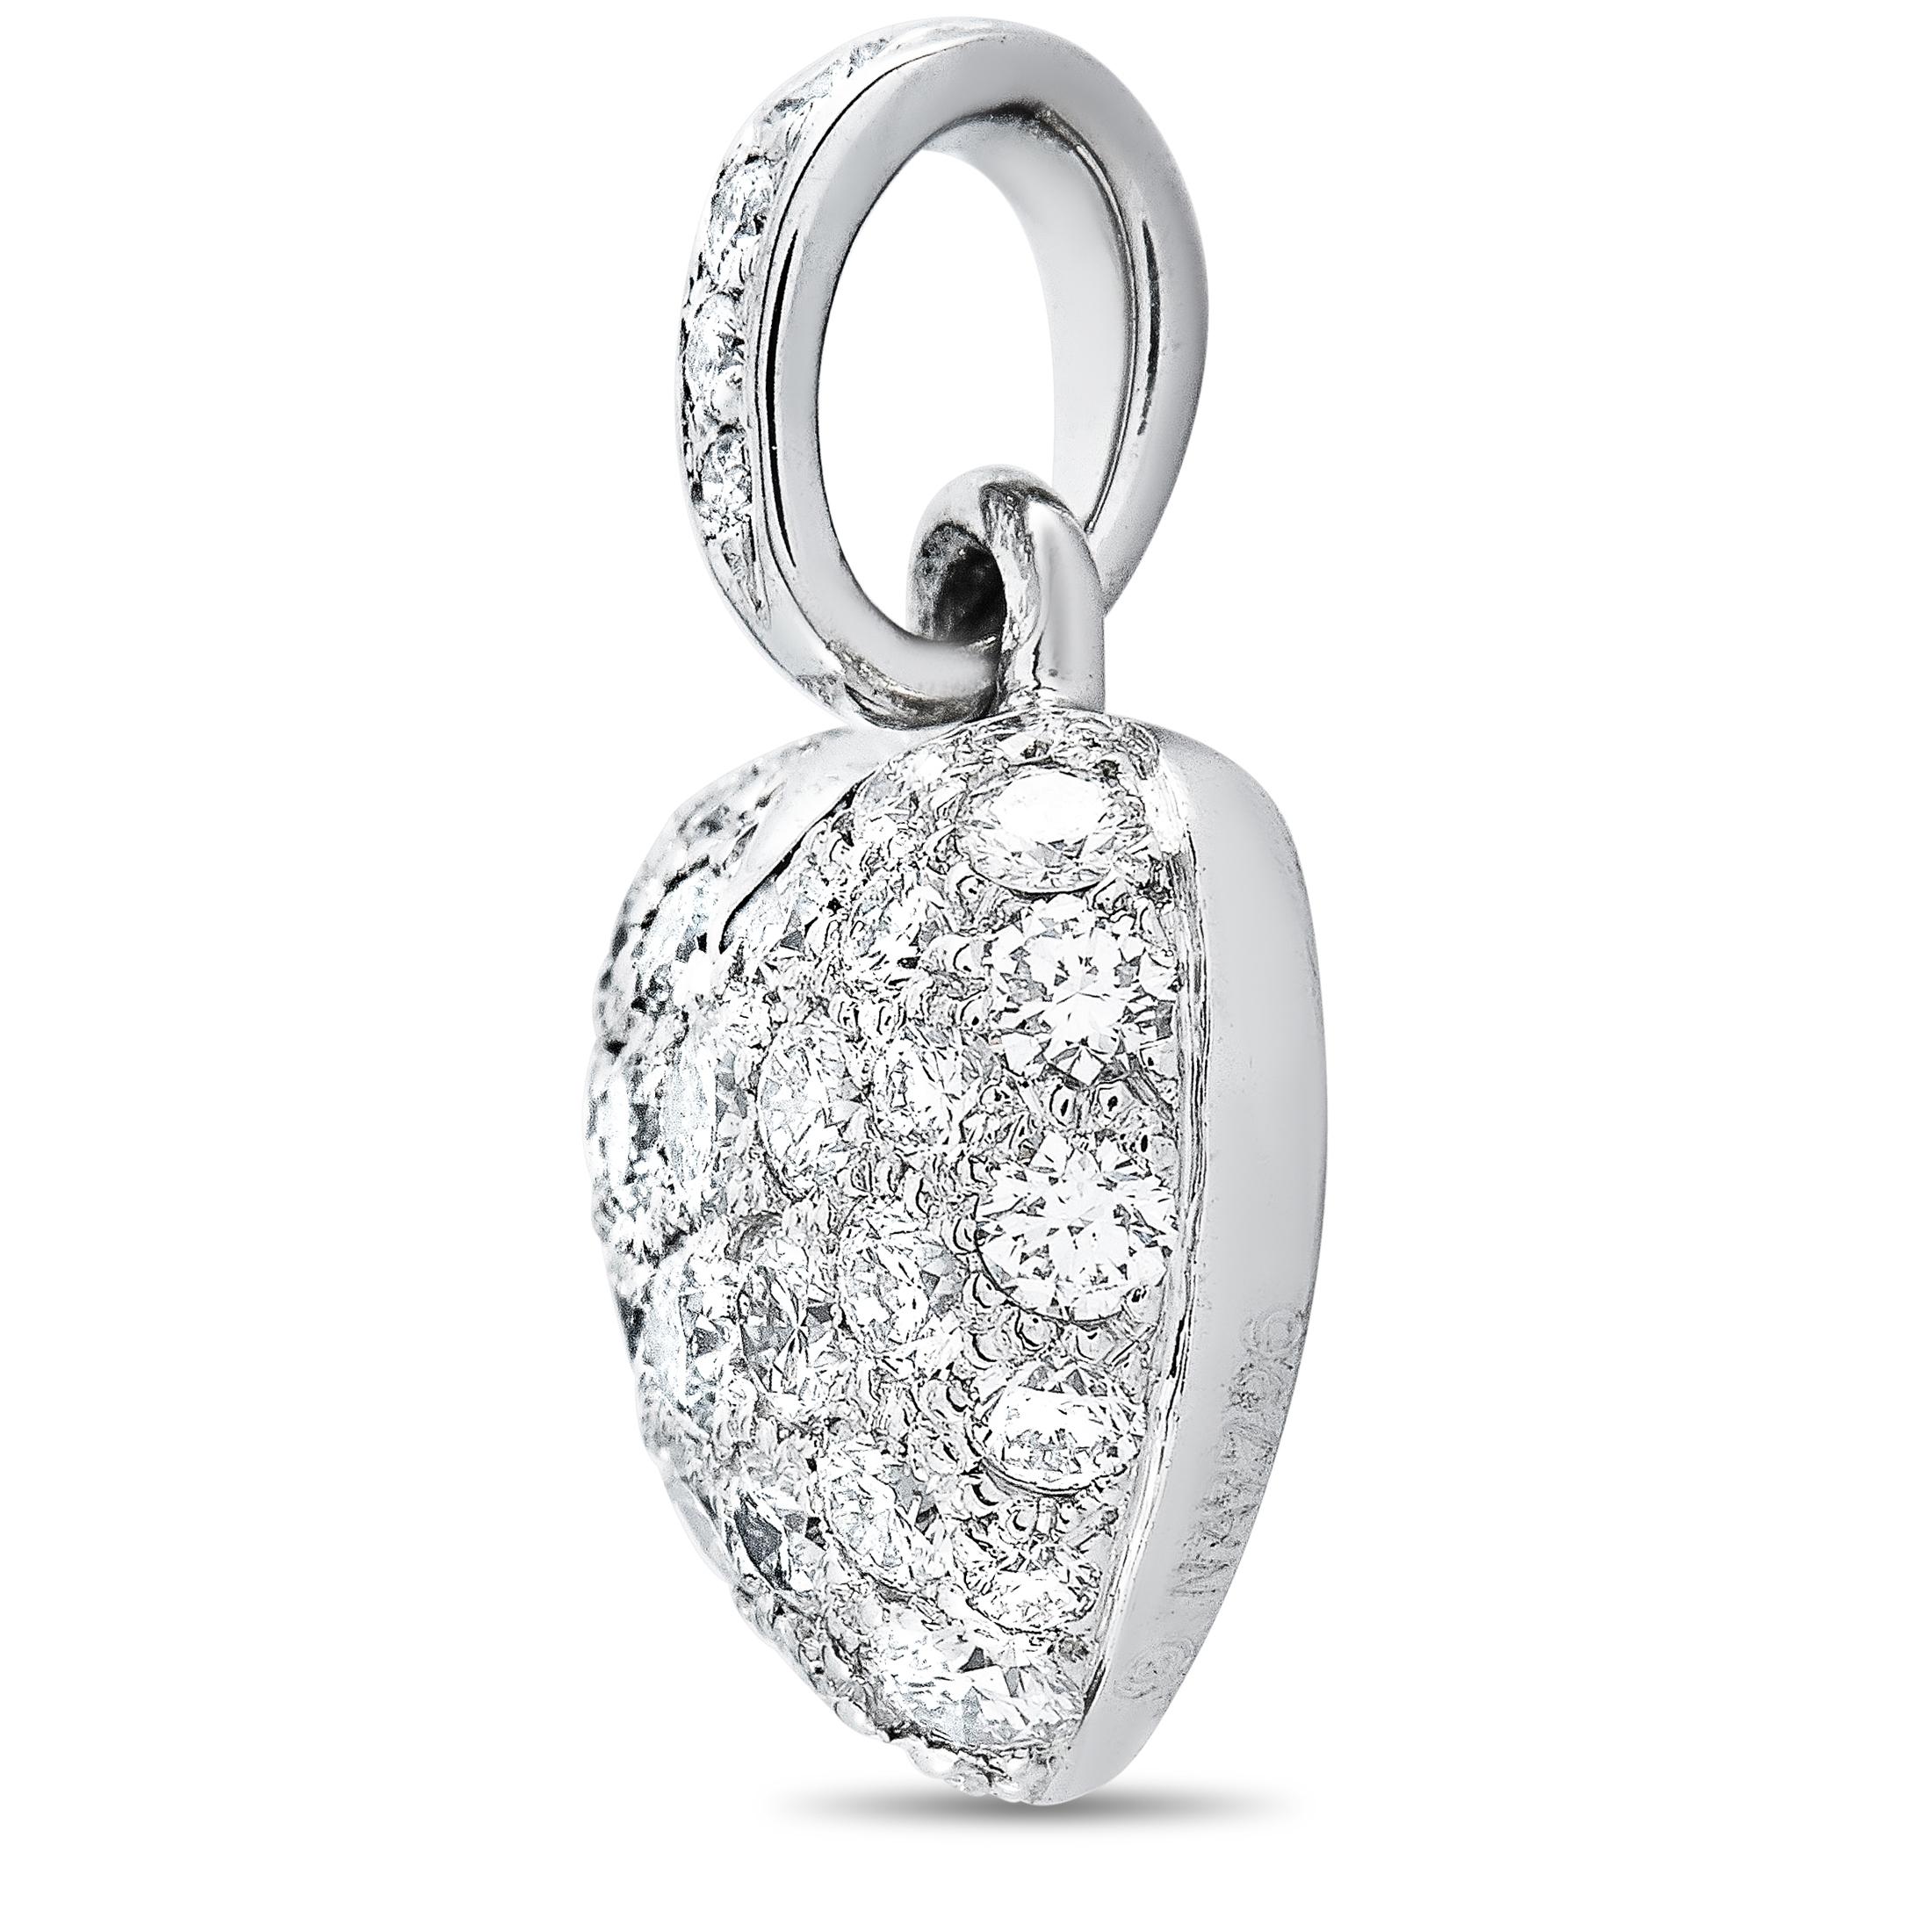 This Cartier heart pendant is made of 18K white gold and embellished with diamonds that feature F color and VS1 clarity and amount to 0.50 carats. The pendant weighs 2.2 grams and measures 0.62” in length and 0.37” in width.
 
 Offered in estate